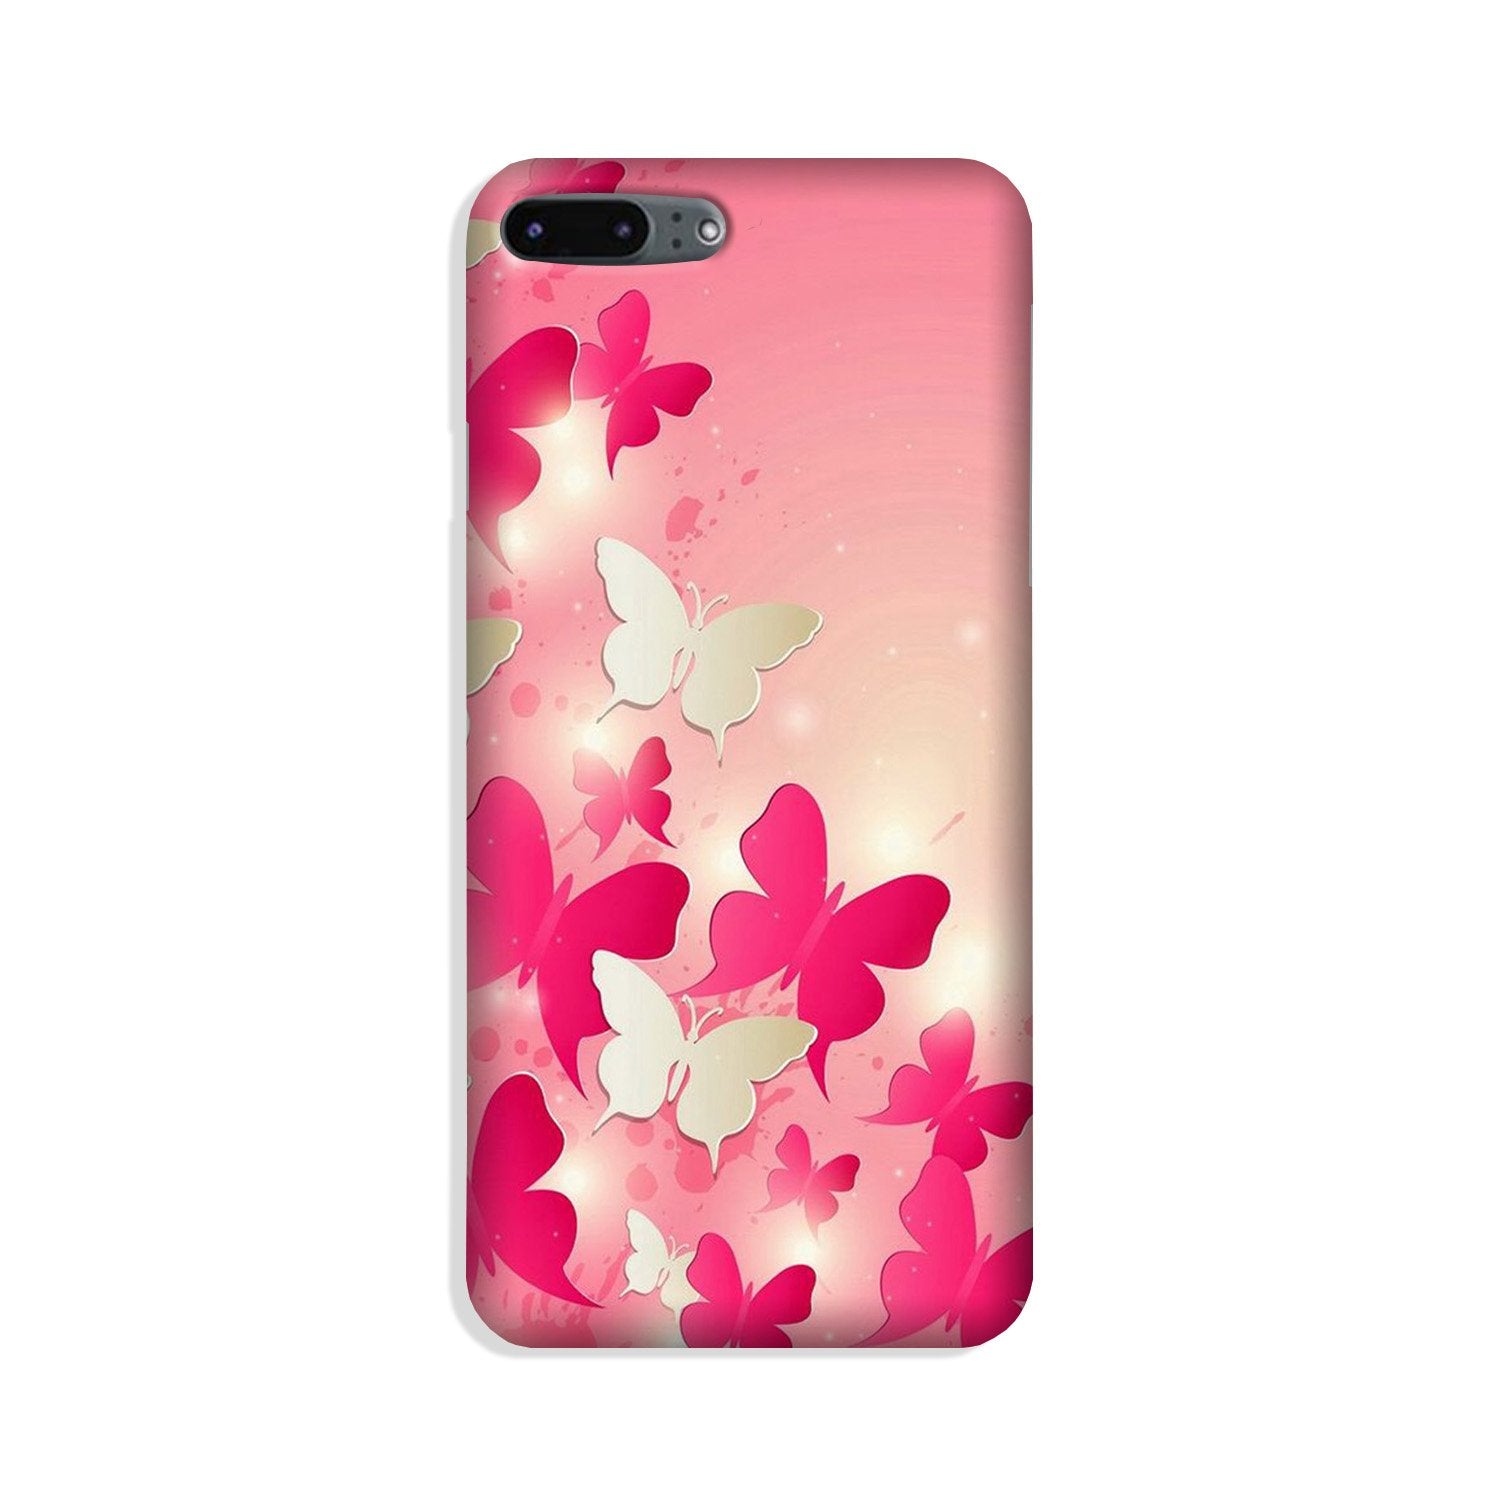 White Pick Butterflies Case for iPhone 8 Plus